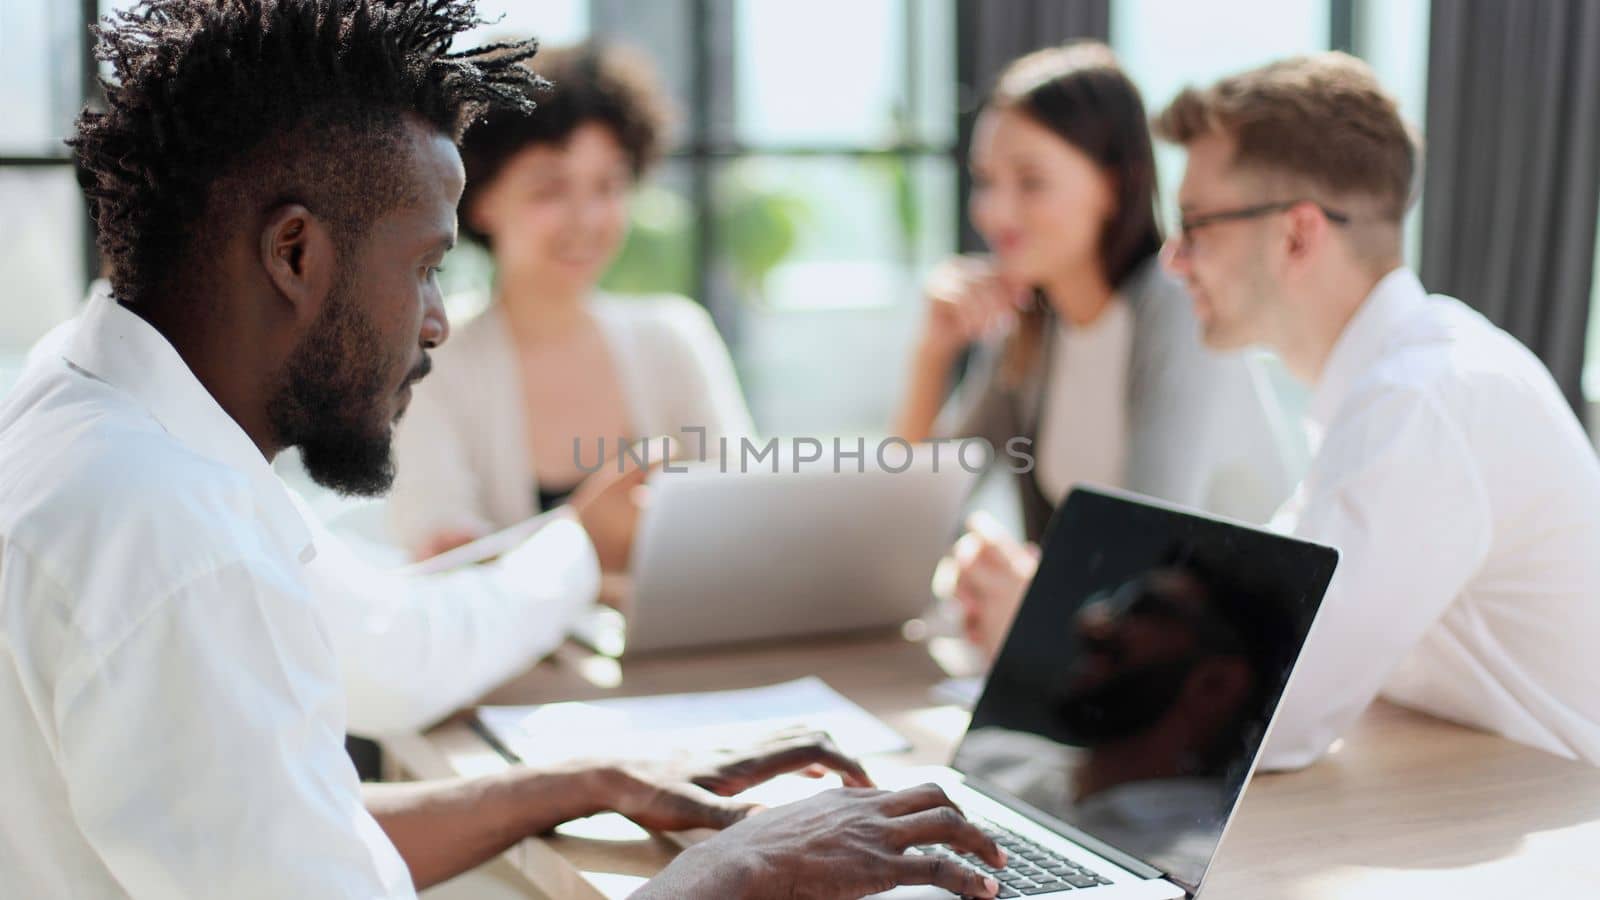 Portrait of smiling African American business man with executives working on laptop in background.